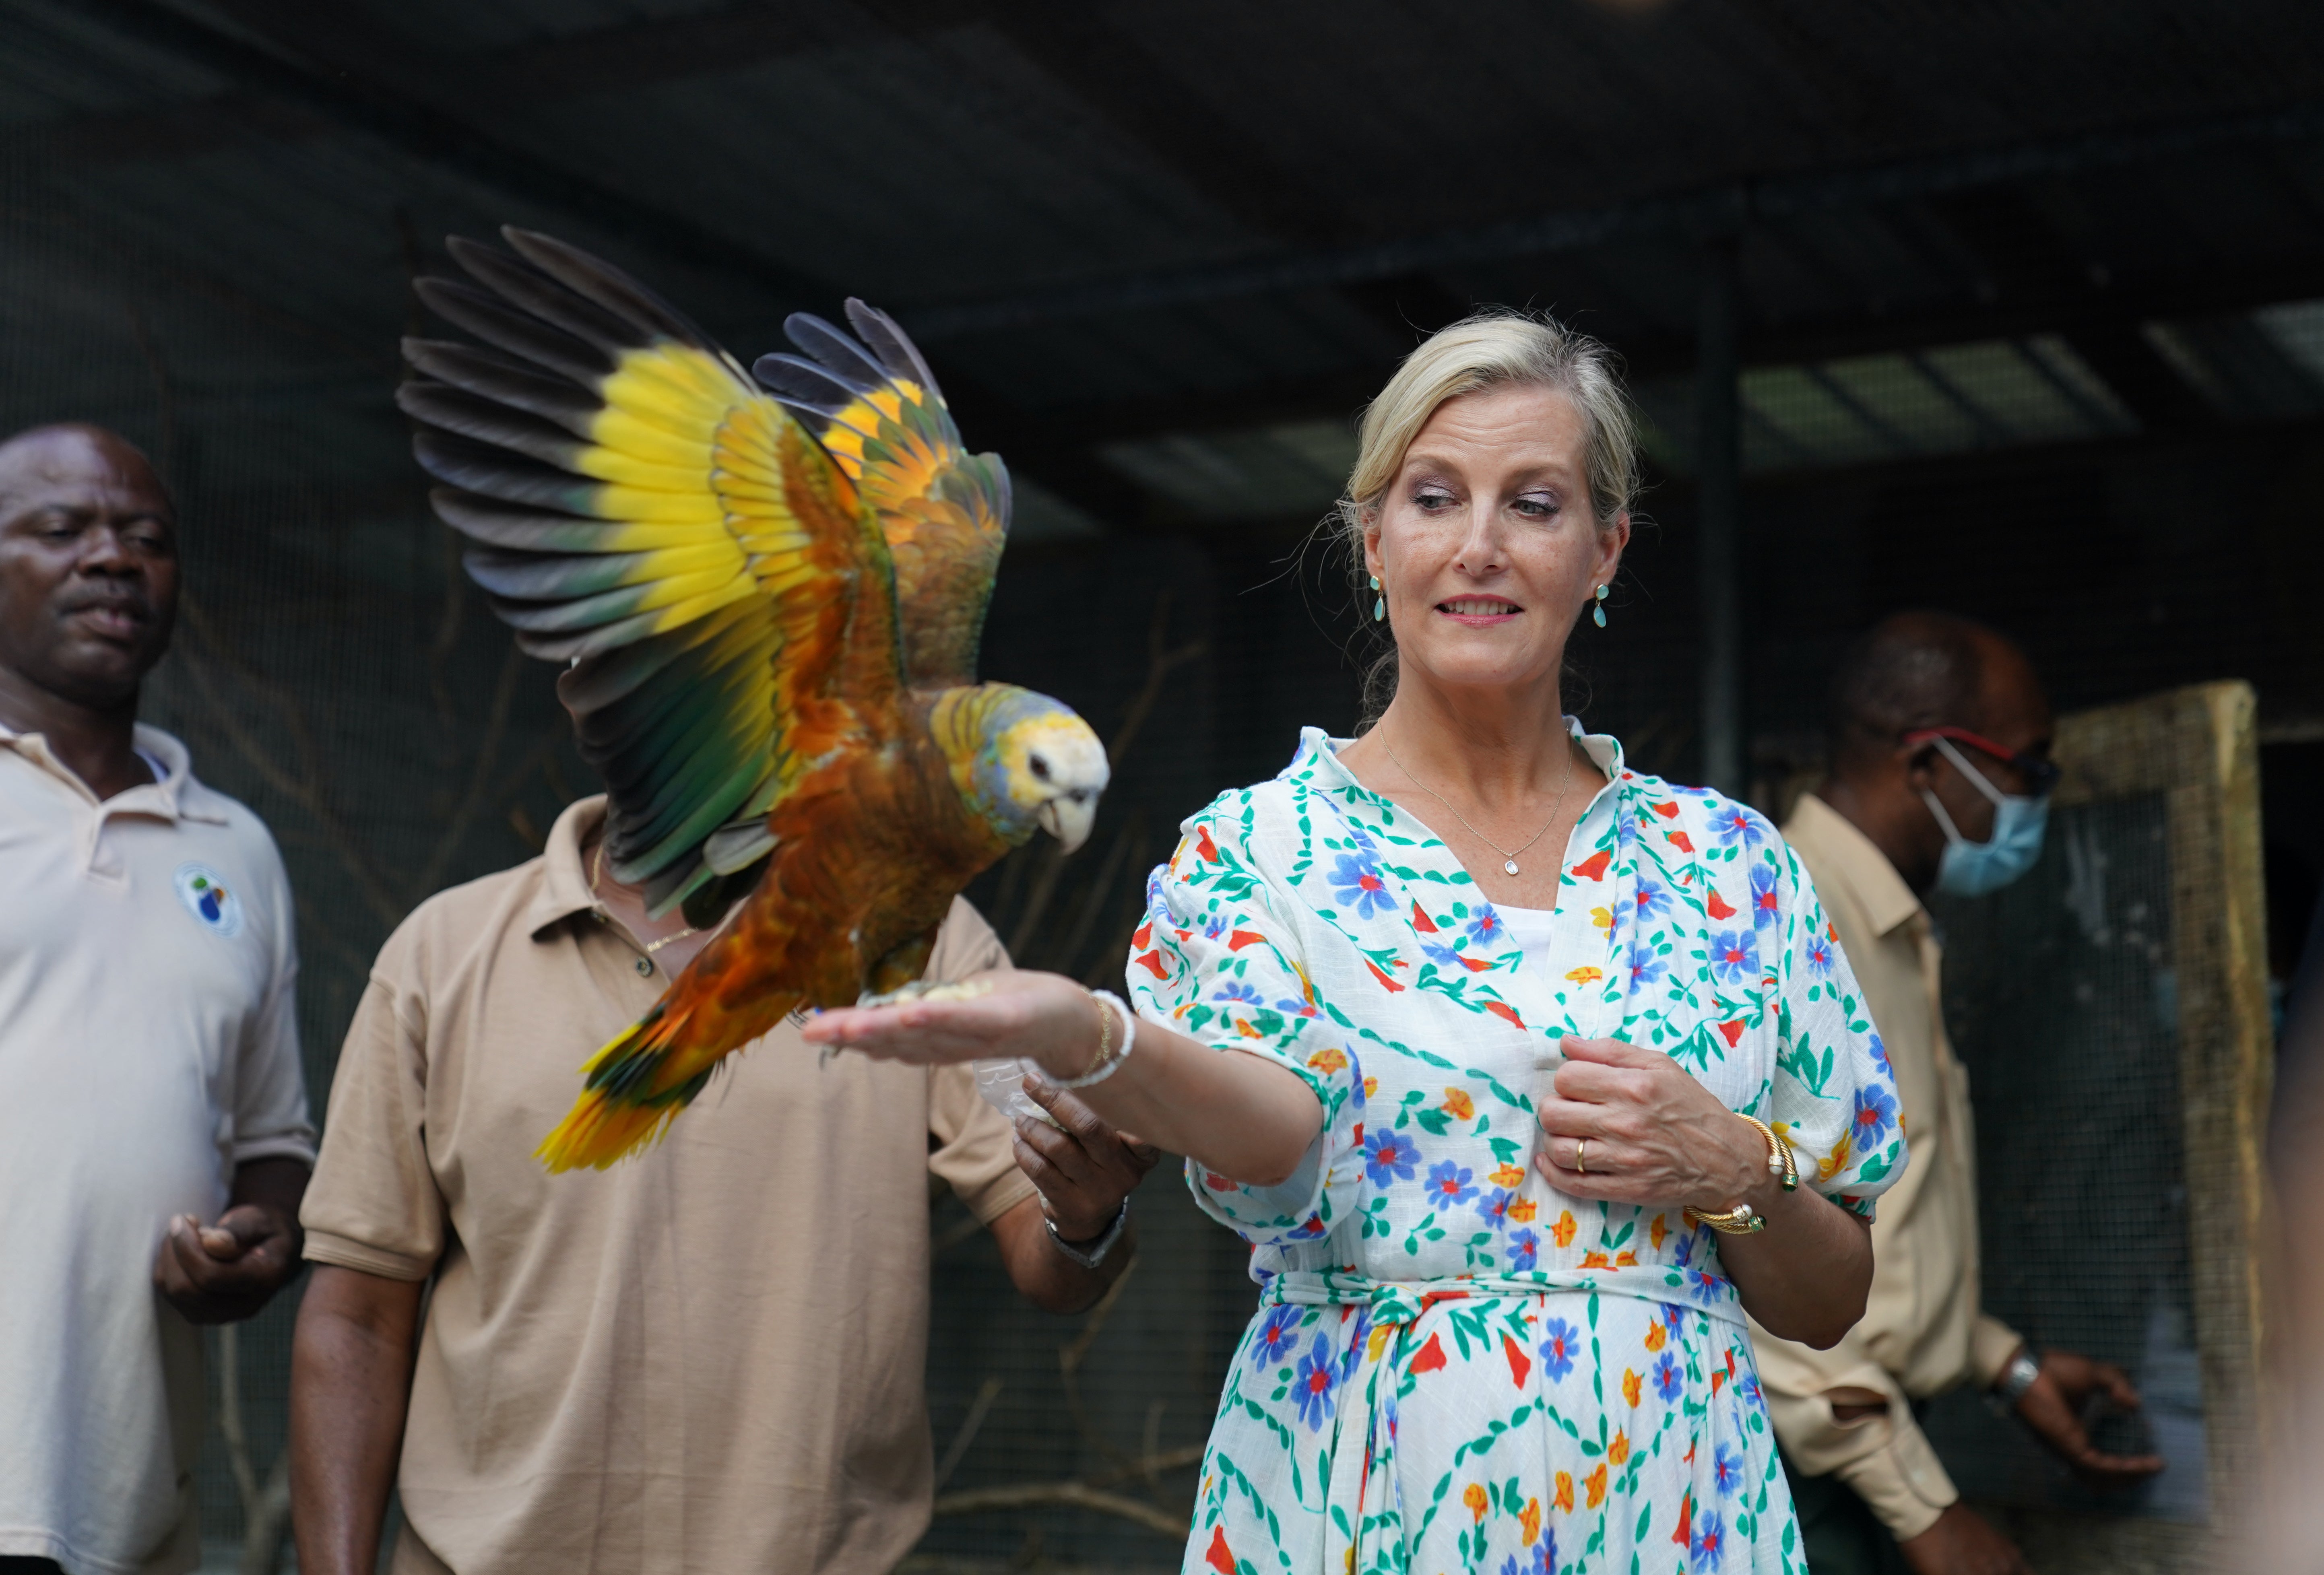 Sophie with St Vincent’s national bird, the Amazona guildingii at the Botanical Gardens in St Vincent and the Grenadines (Joe Giddens/PA)